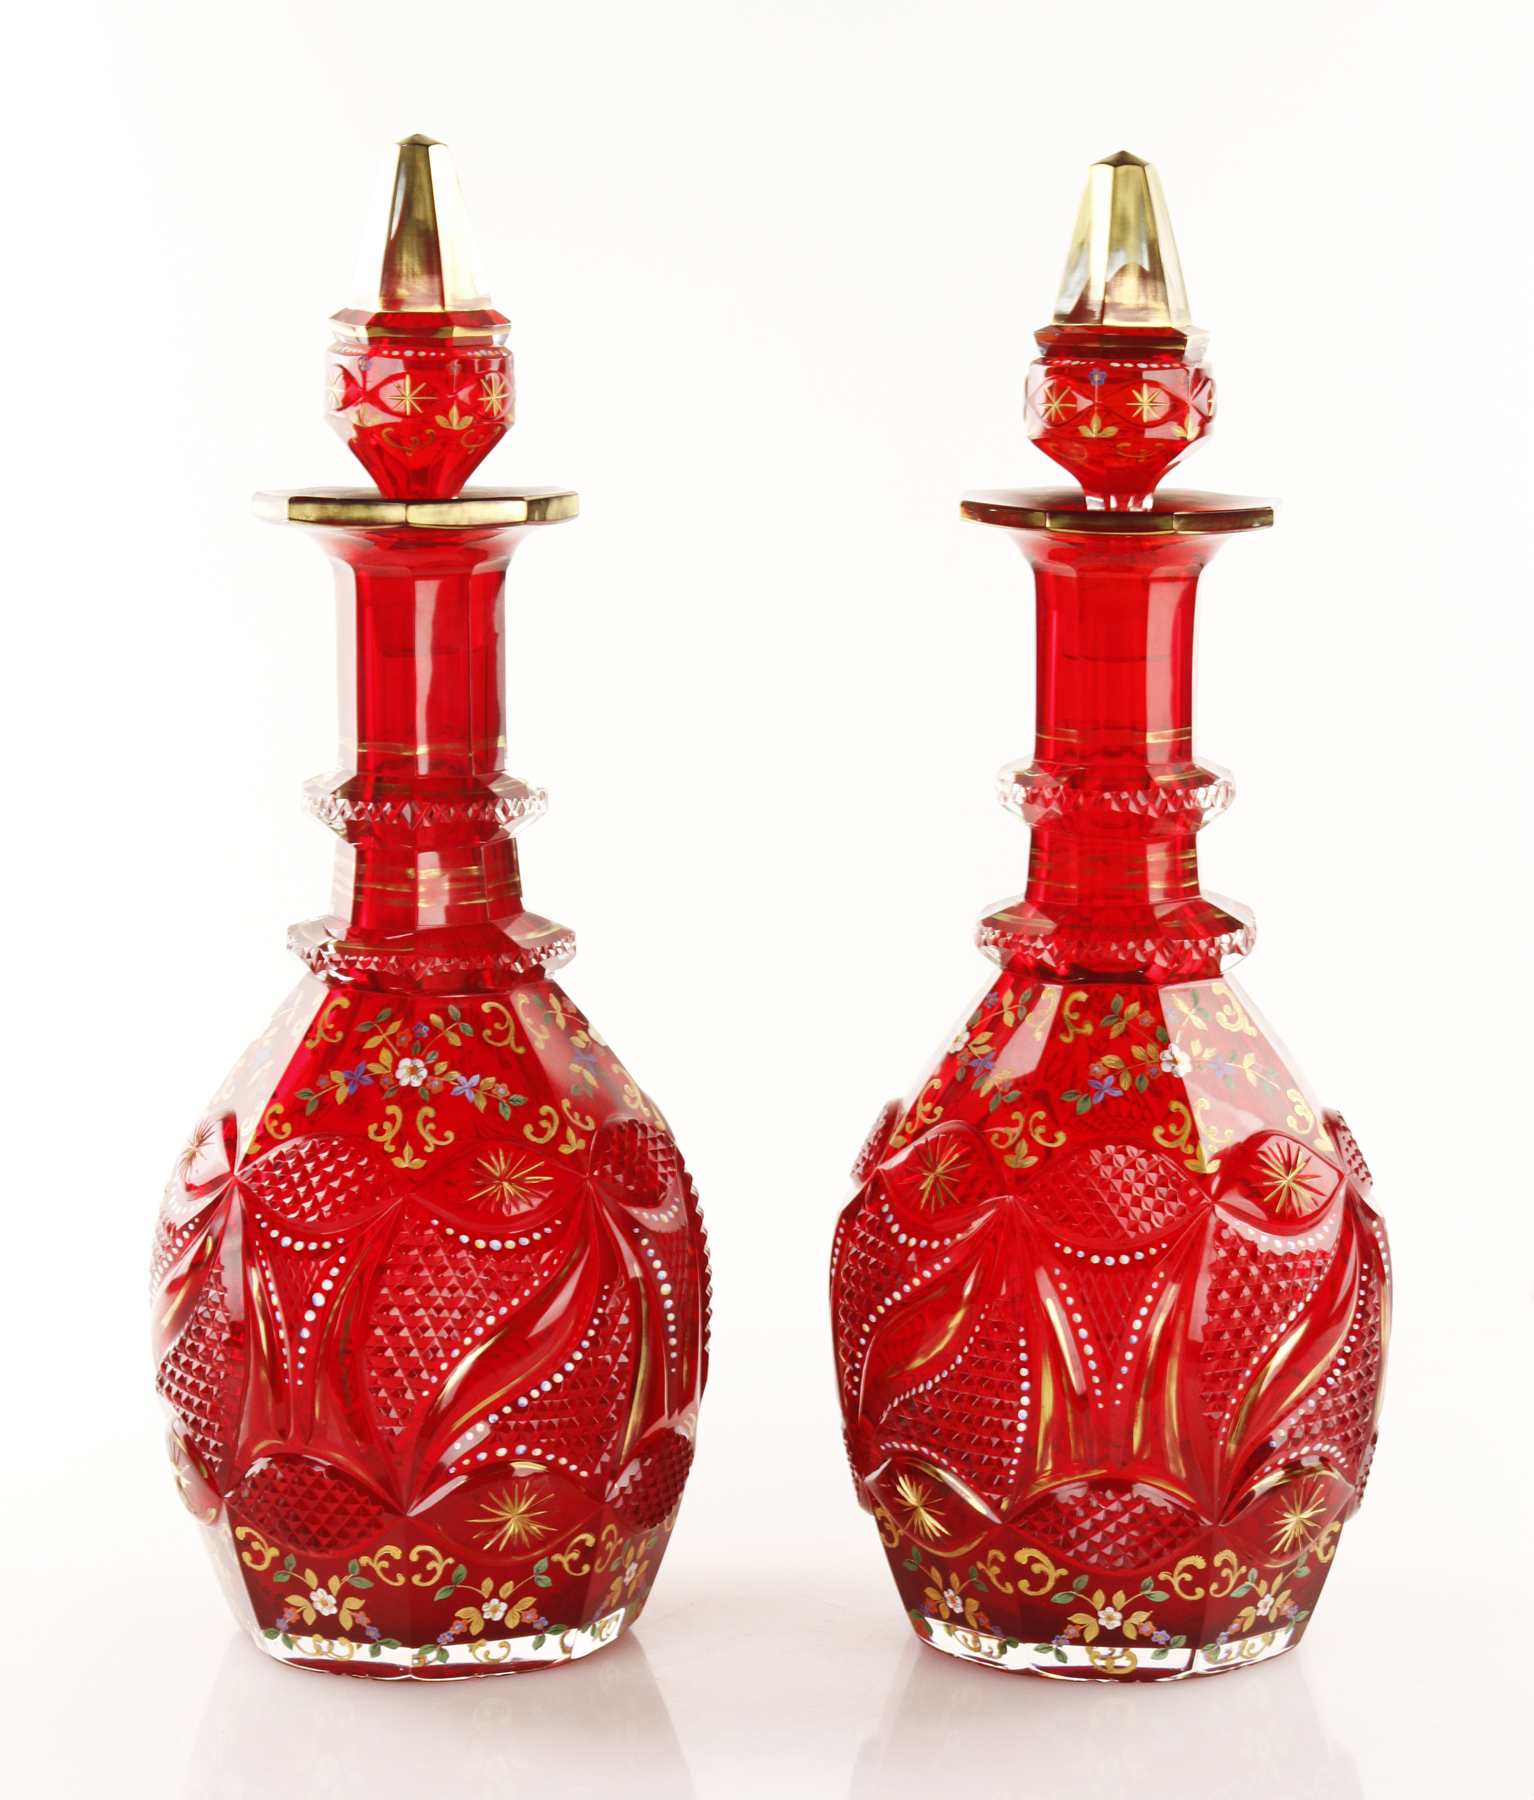 Pair of rare 19th century Bohemian glass decanters, ruby red cut glass, with gilt and enamel decoration, made for the Islamic market.